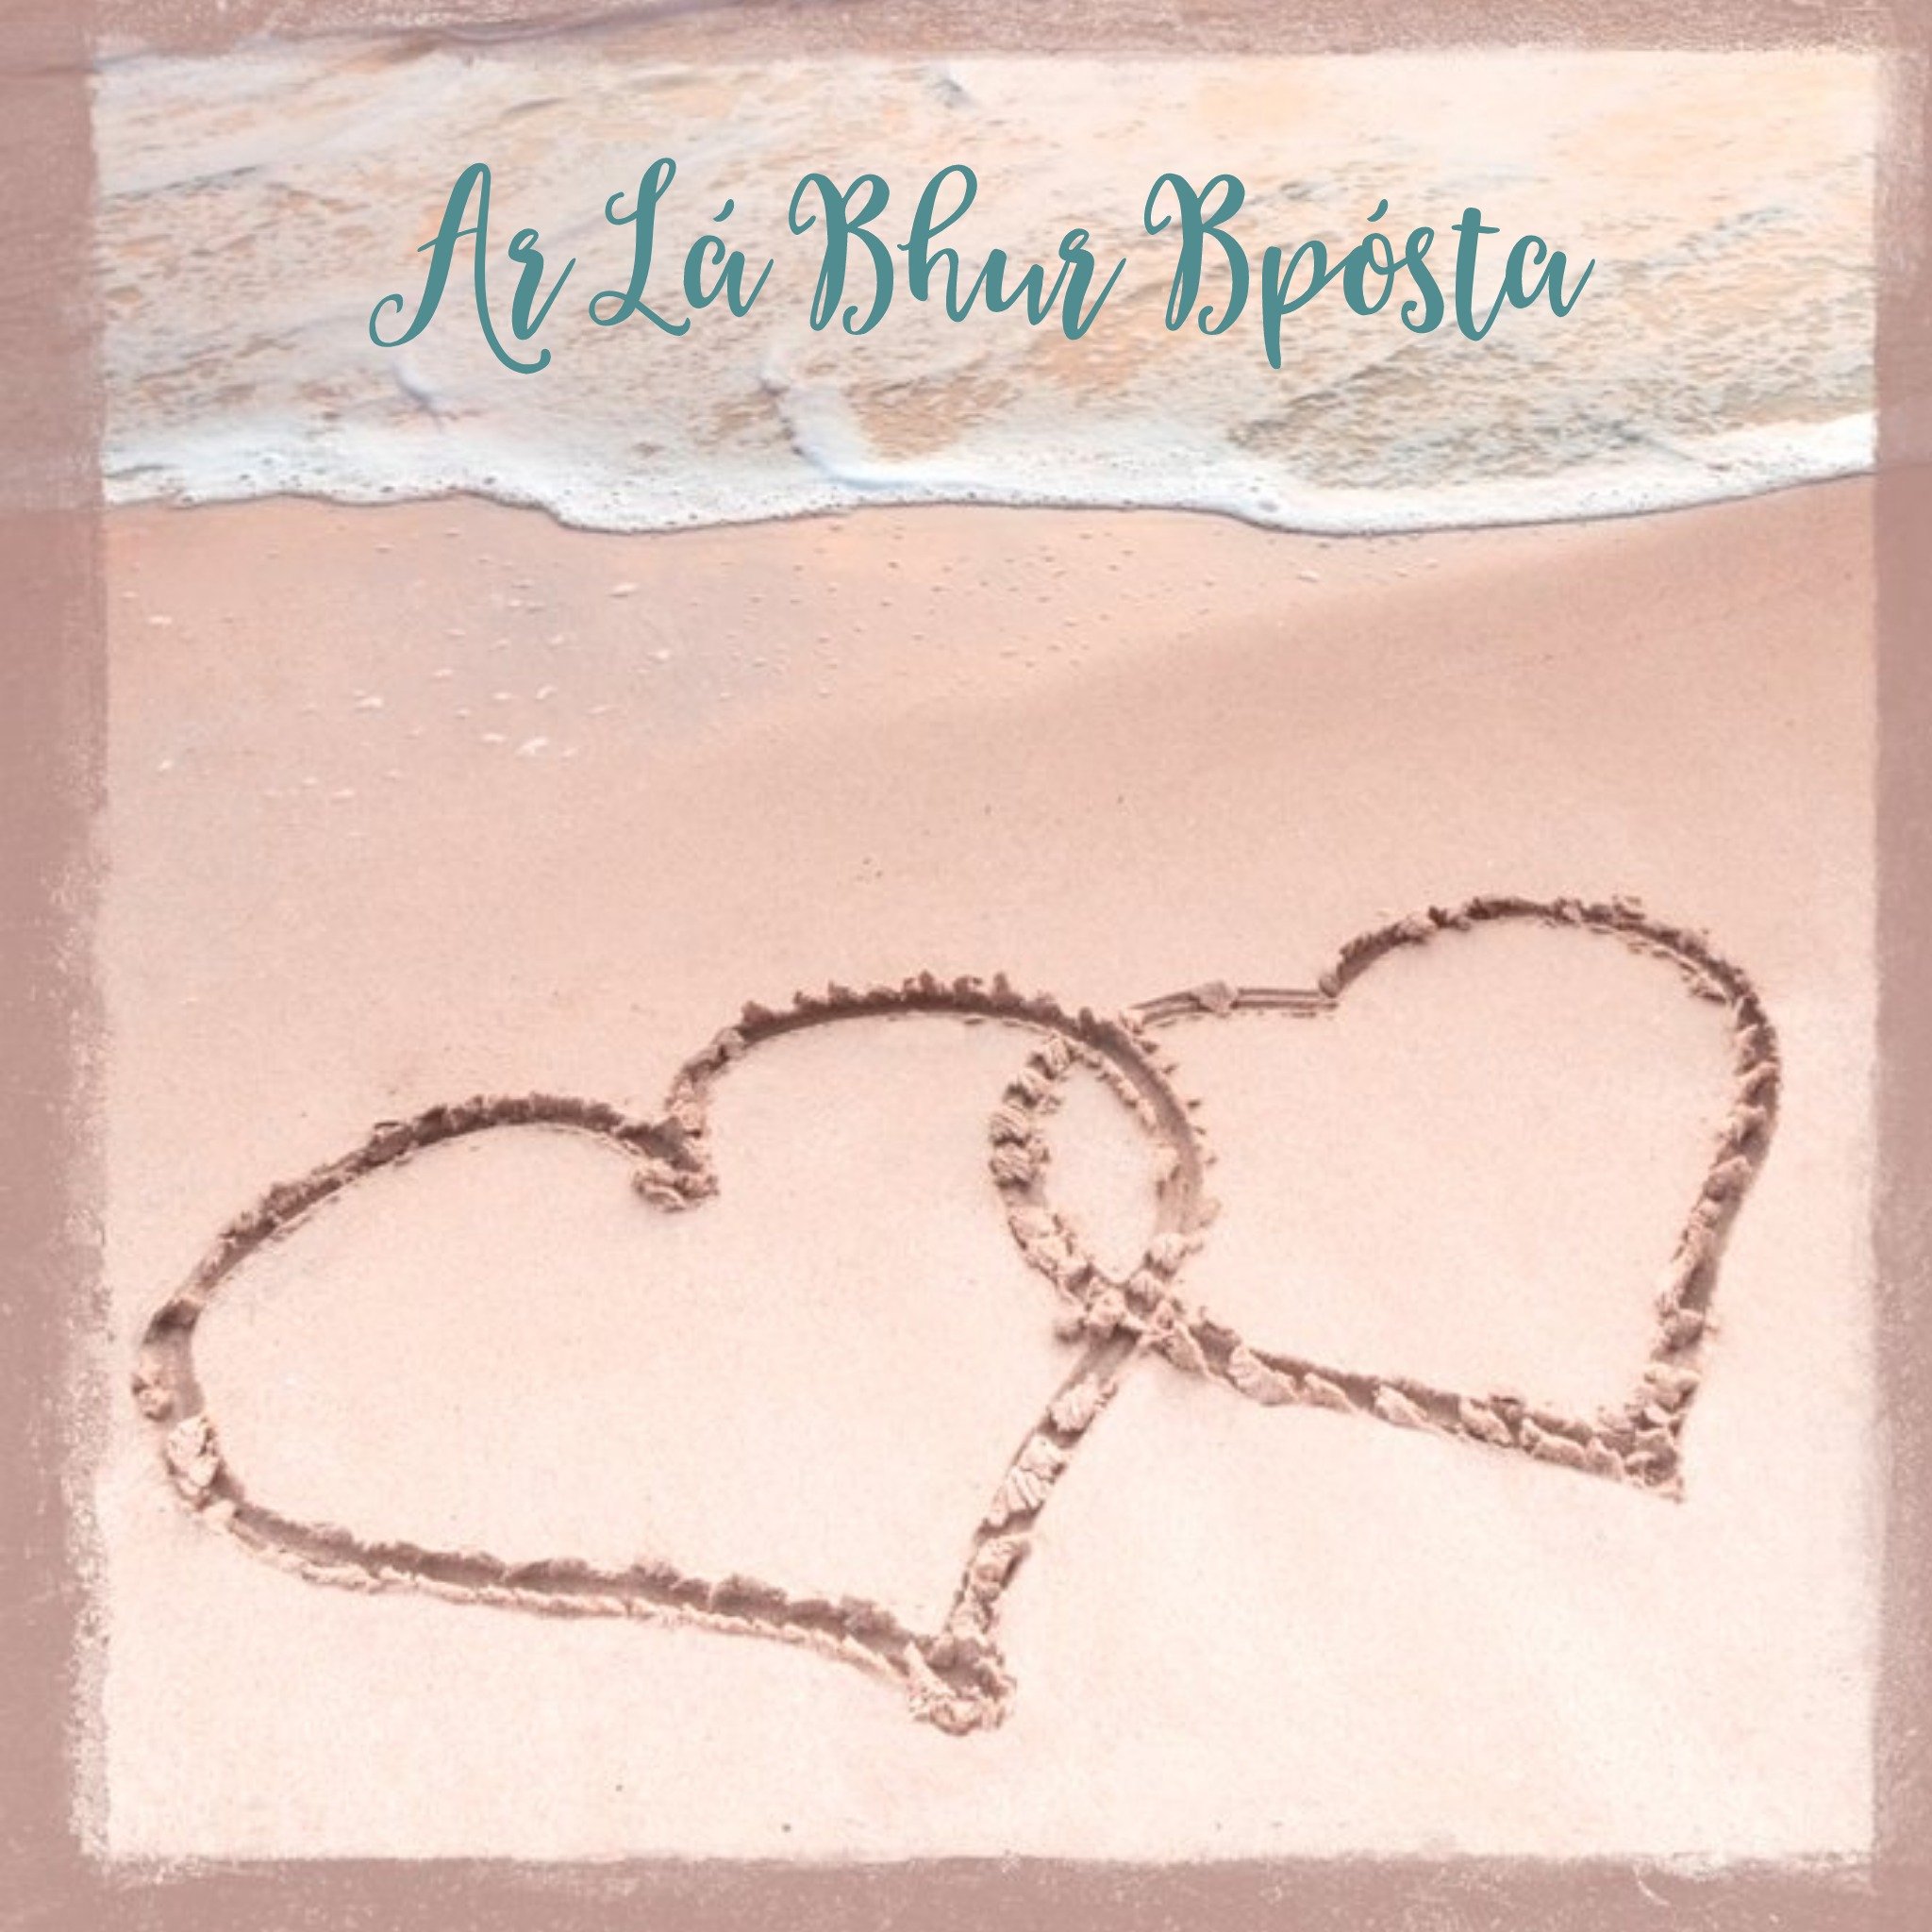 Moonpig Cute Photographic Image Of Linked Hearts On A Beach Wedding Card, Large